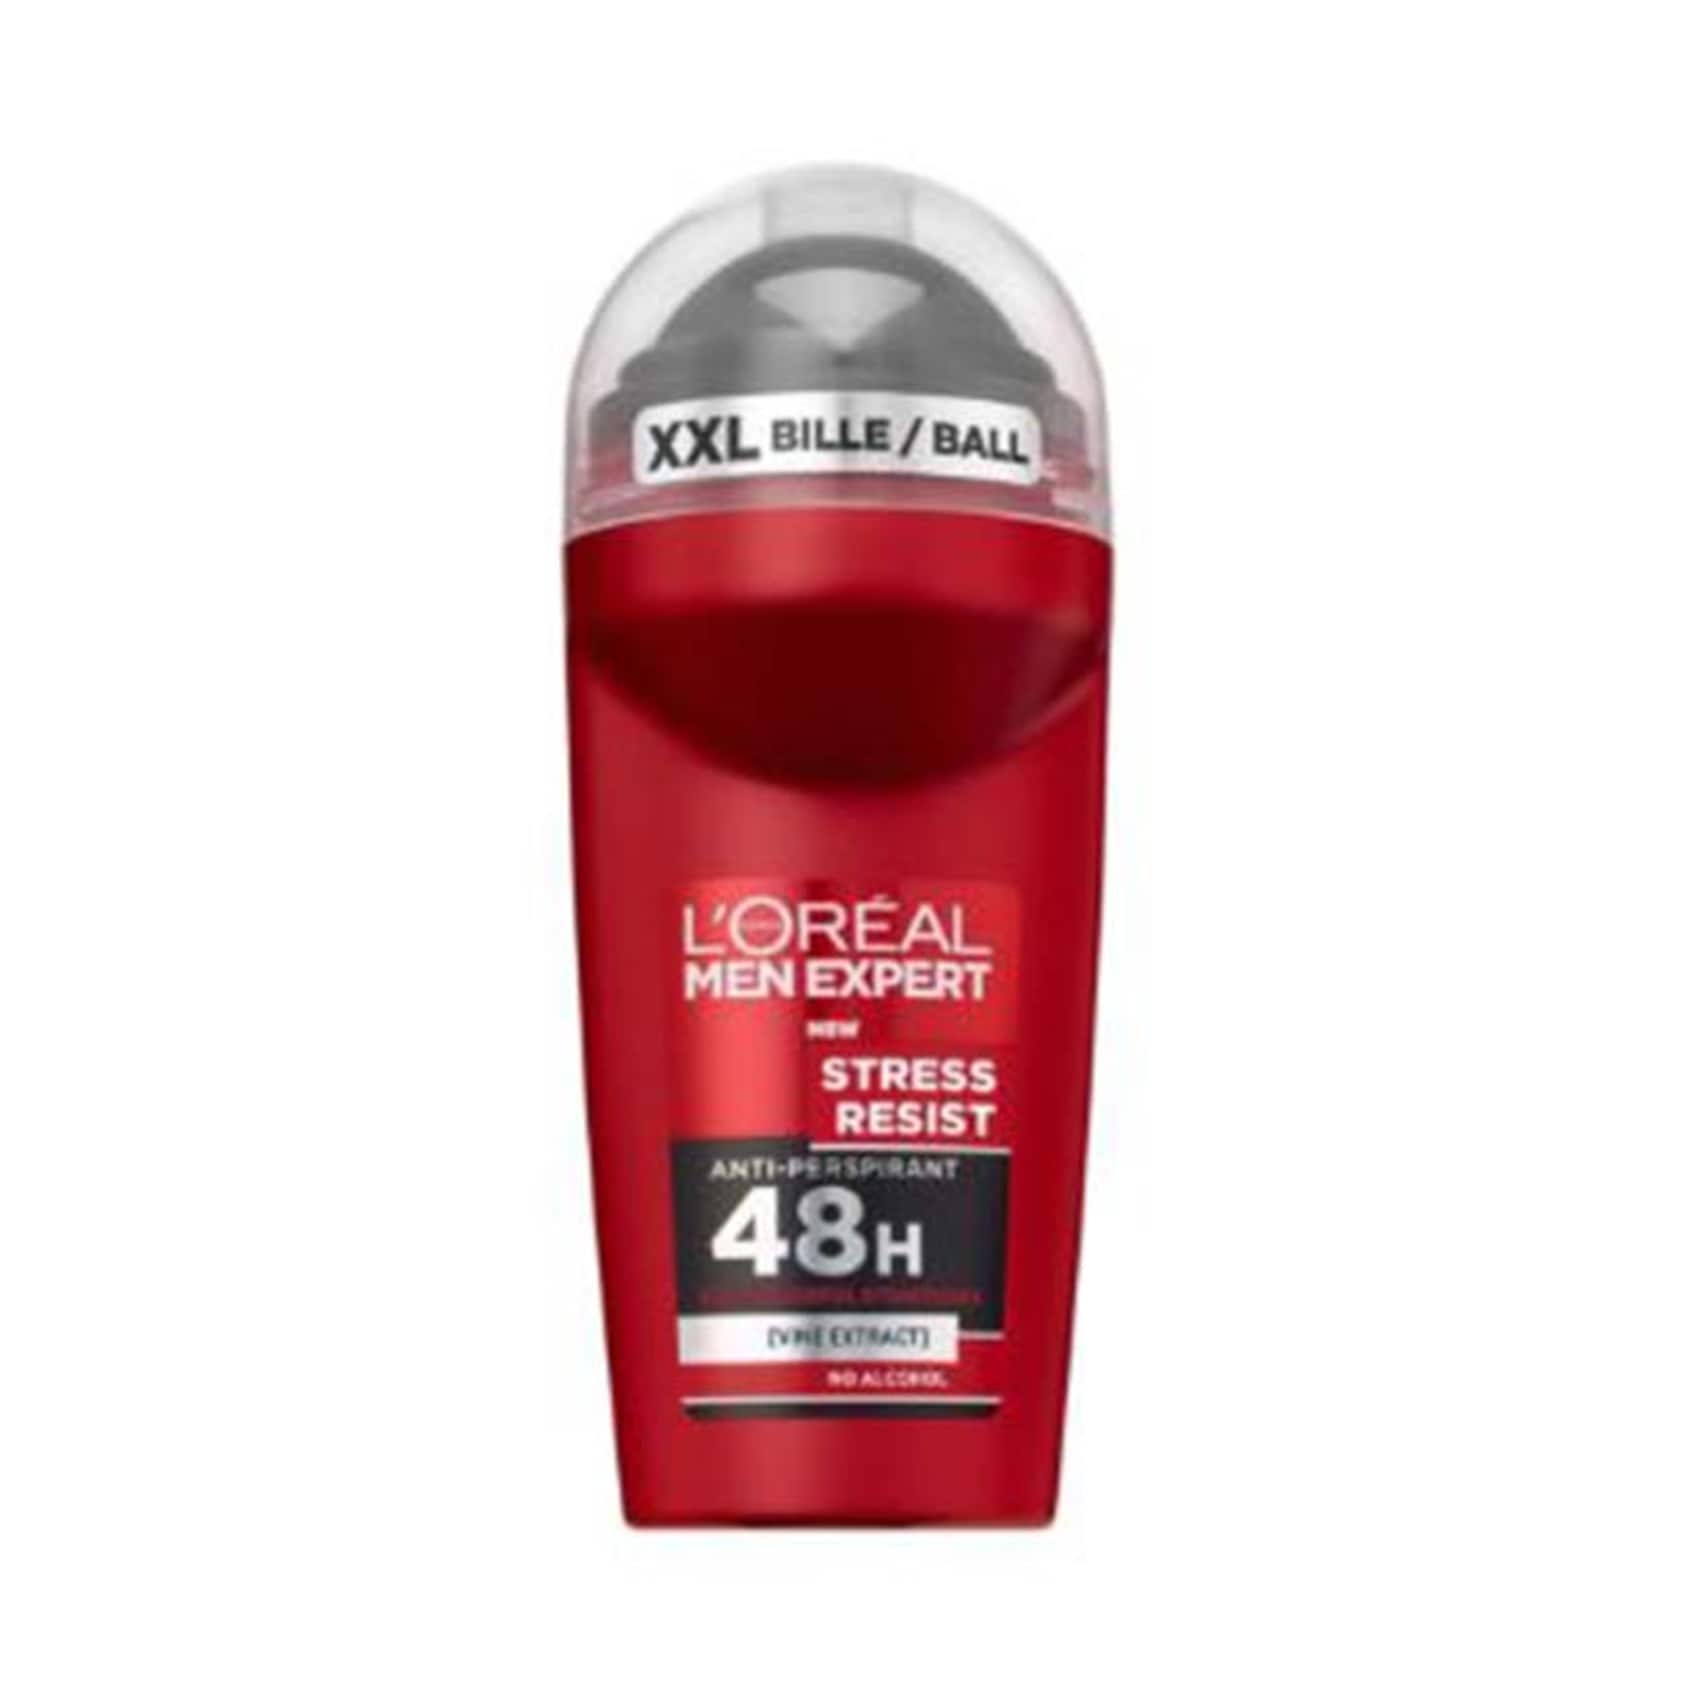 Loreal Homme Clear Fix Antiroos-Styling Gel (150ml) - kapperssale